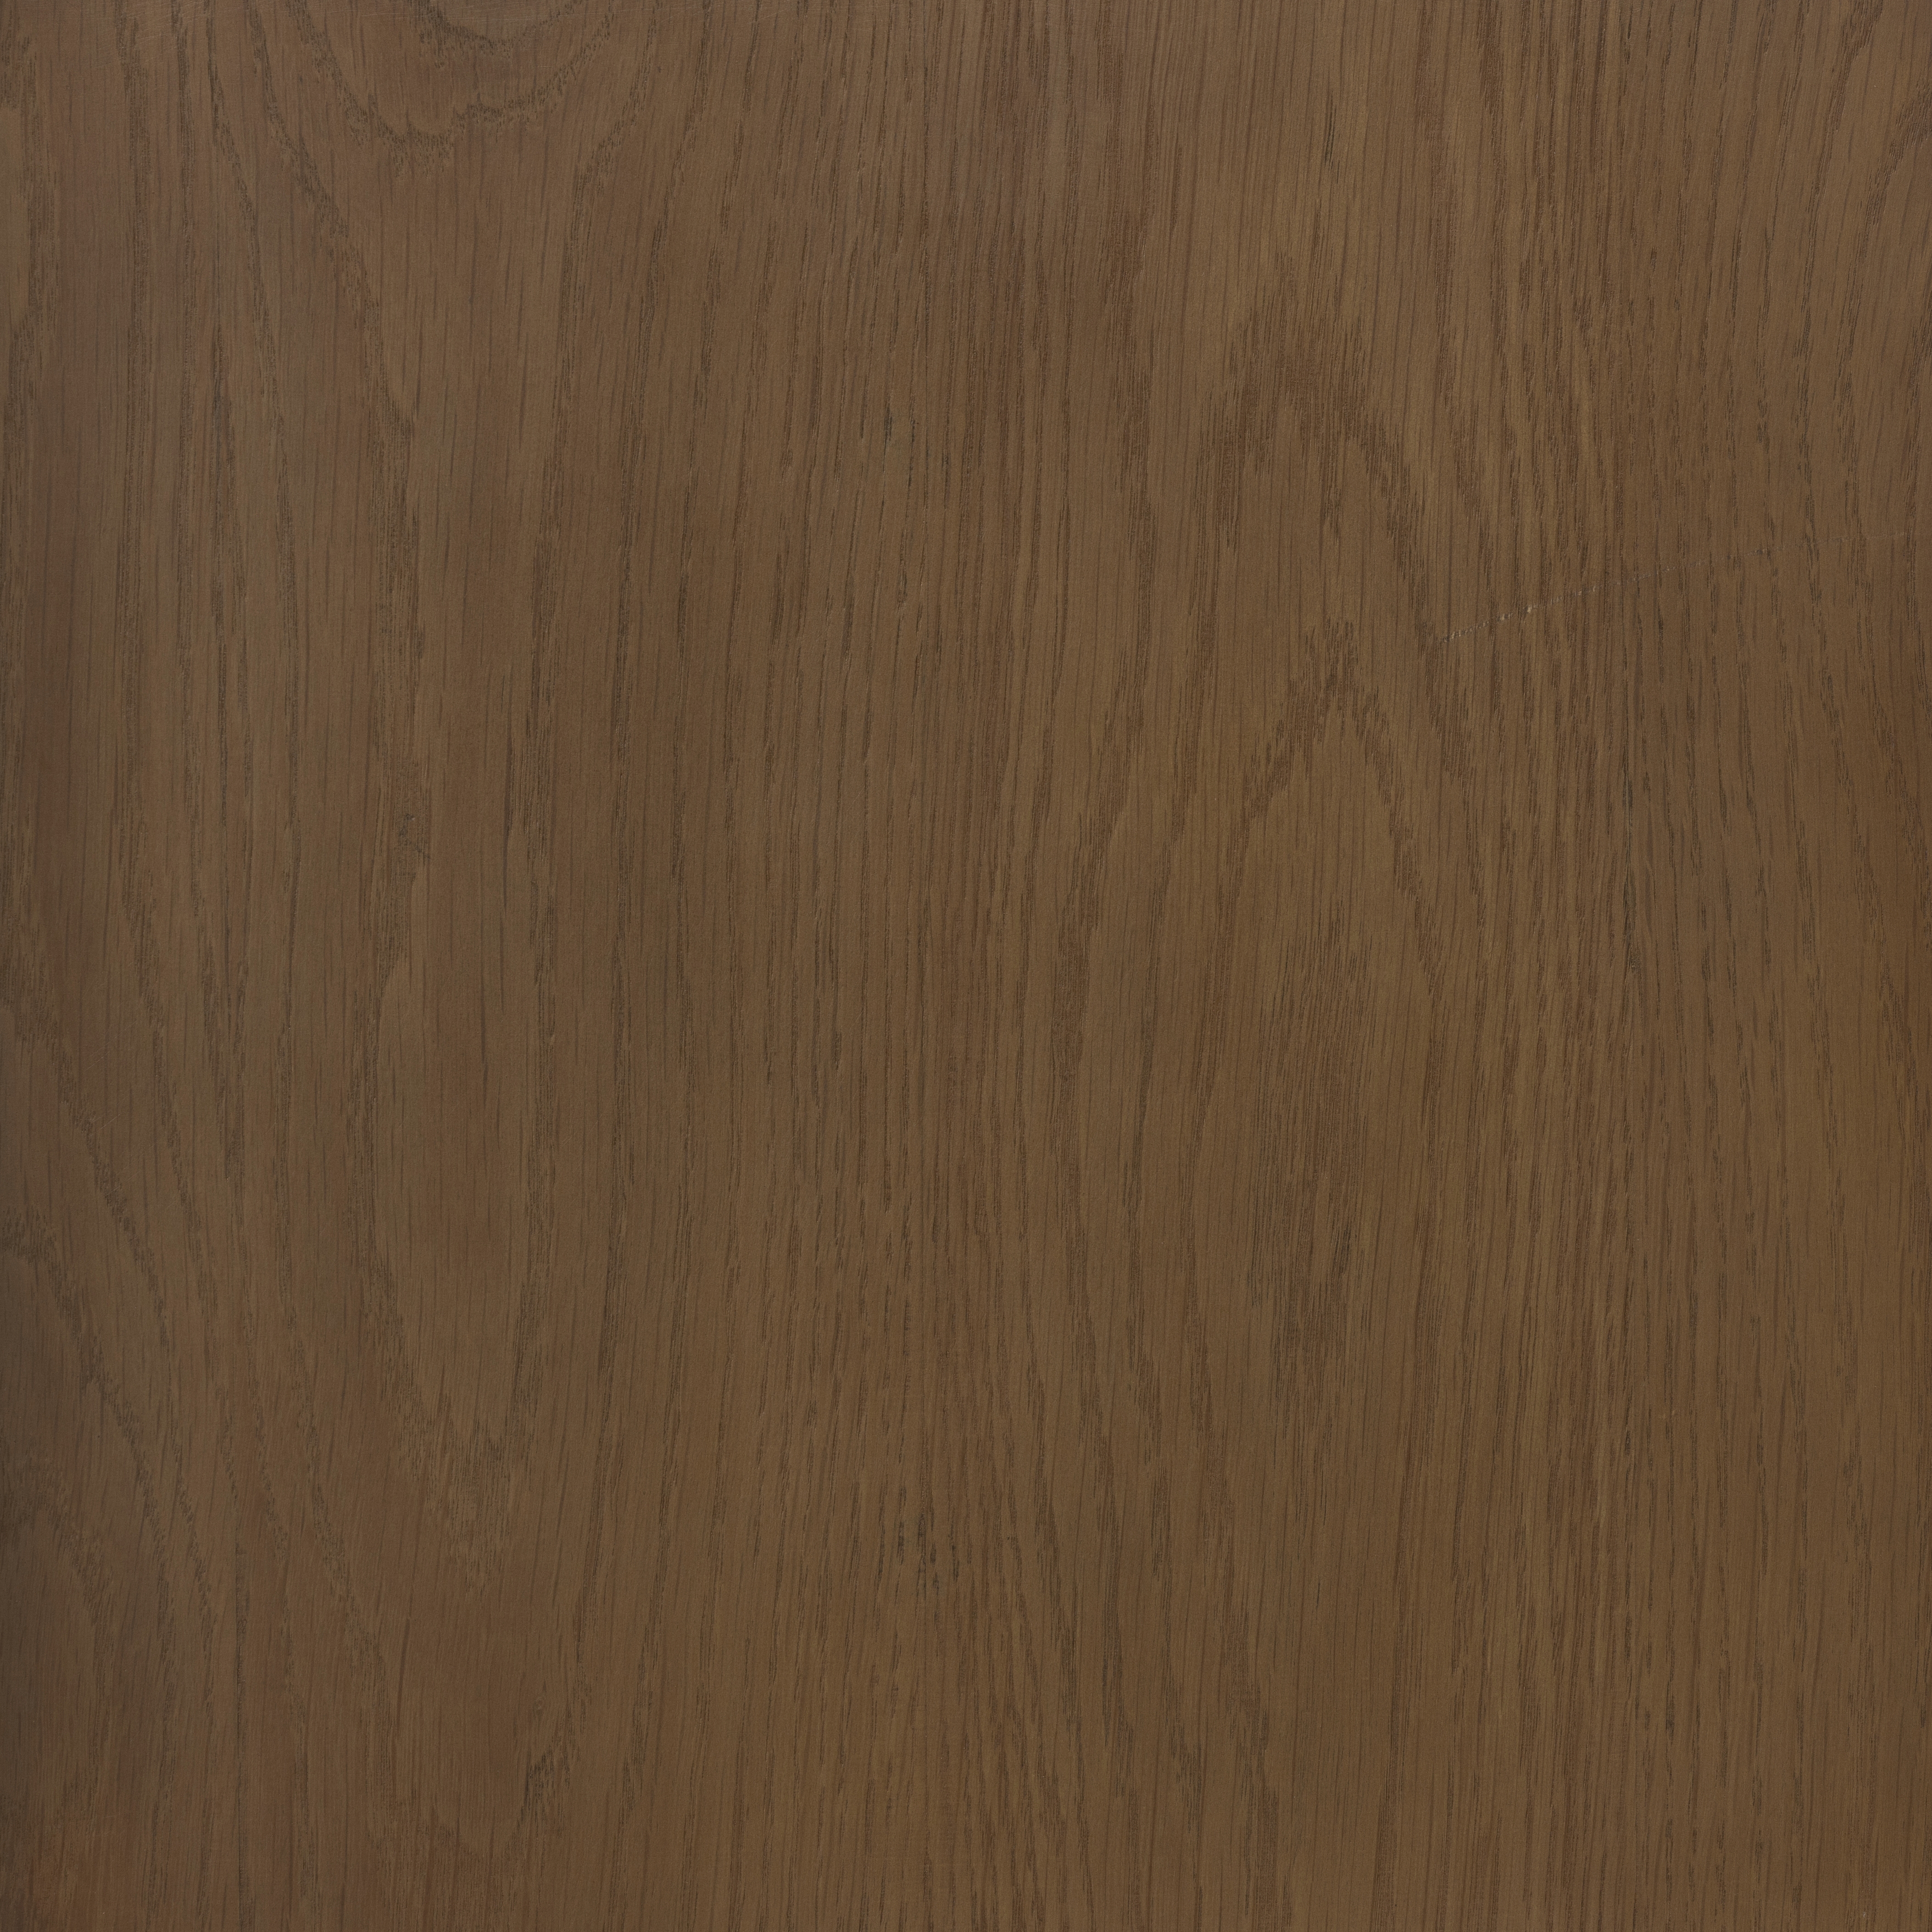 Toulouse Chest-Toasted Oak - Image 7